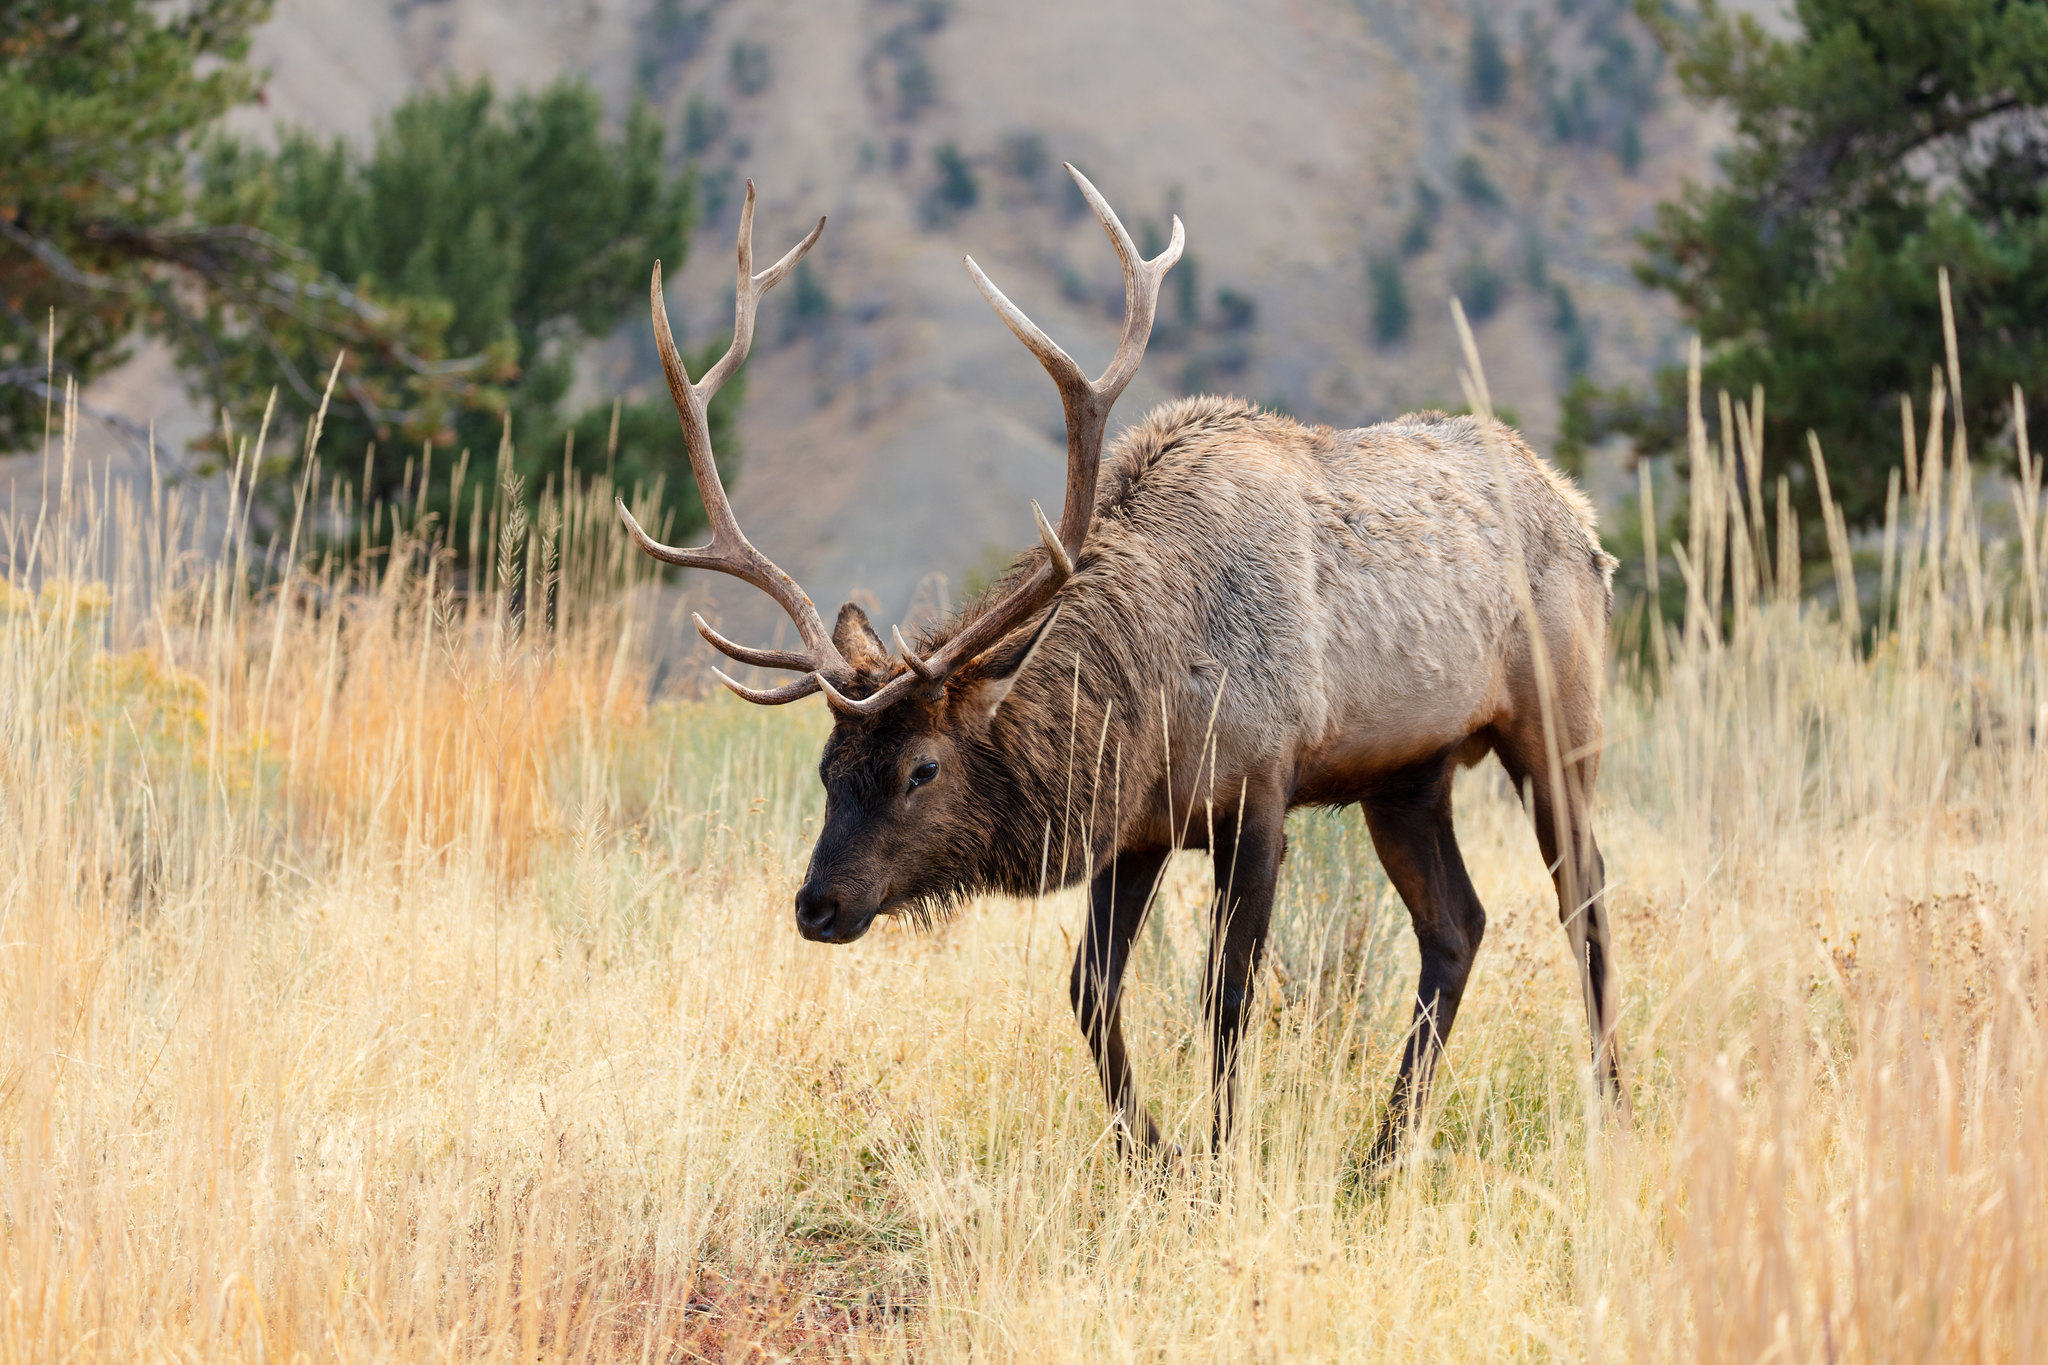 Bull elk grazing in Yellowstone National Park. Image credit: Jacob W. Frank, Public Domain